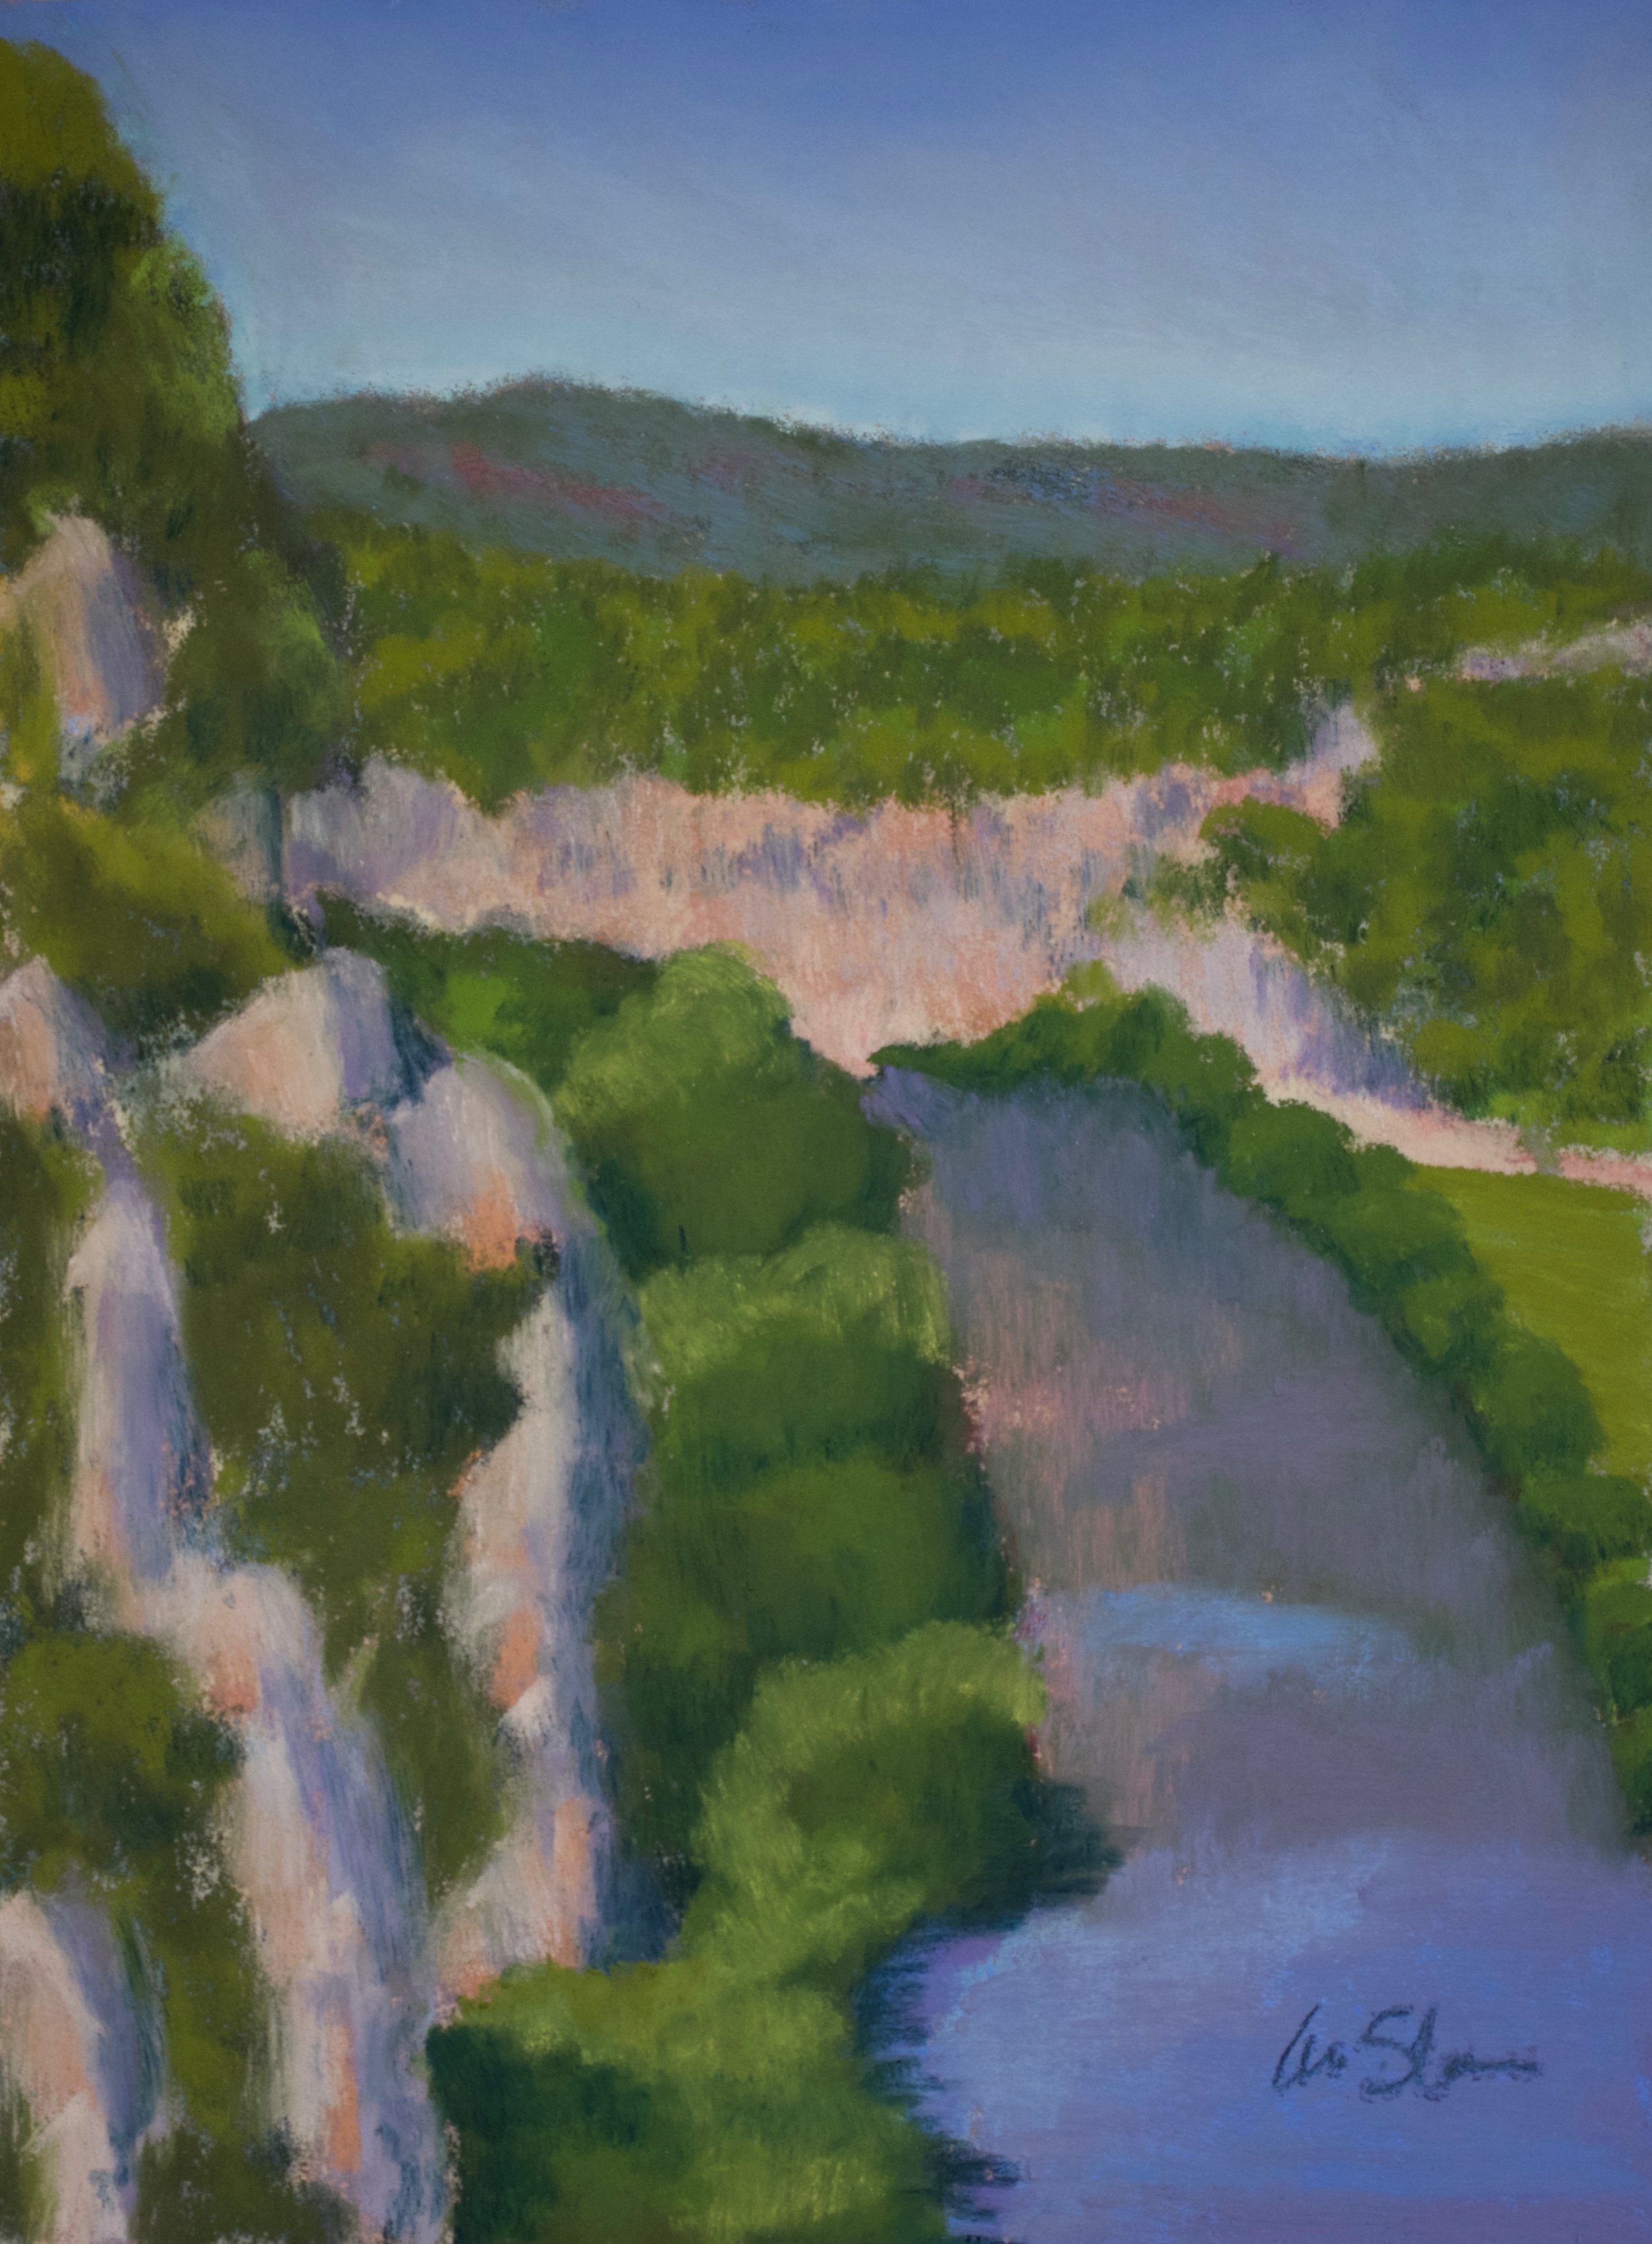  River Gorge 2015  pastel on paper, 9x12 inches 